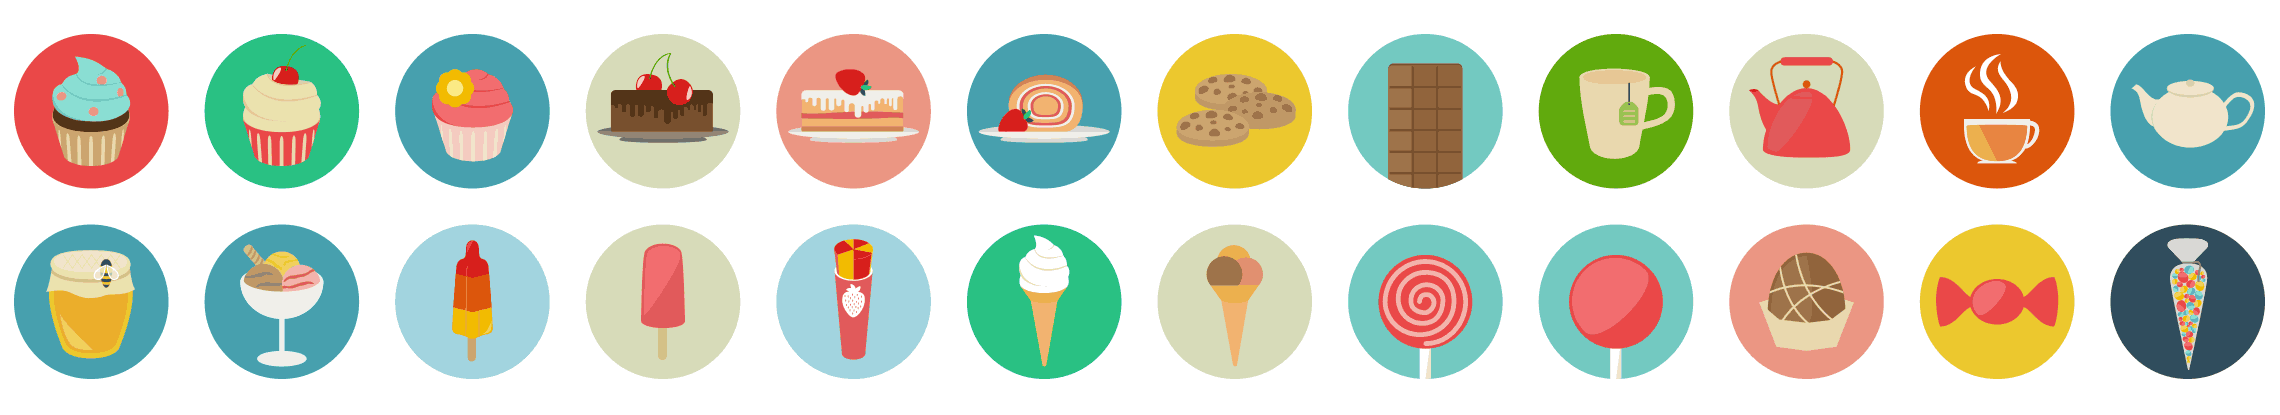 sweets-and-drinks-flat-icons-vol-1-preview